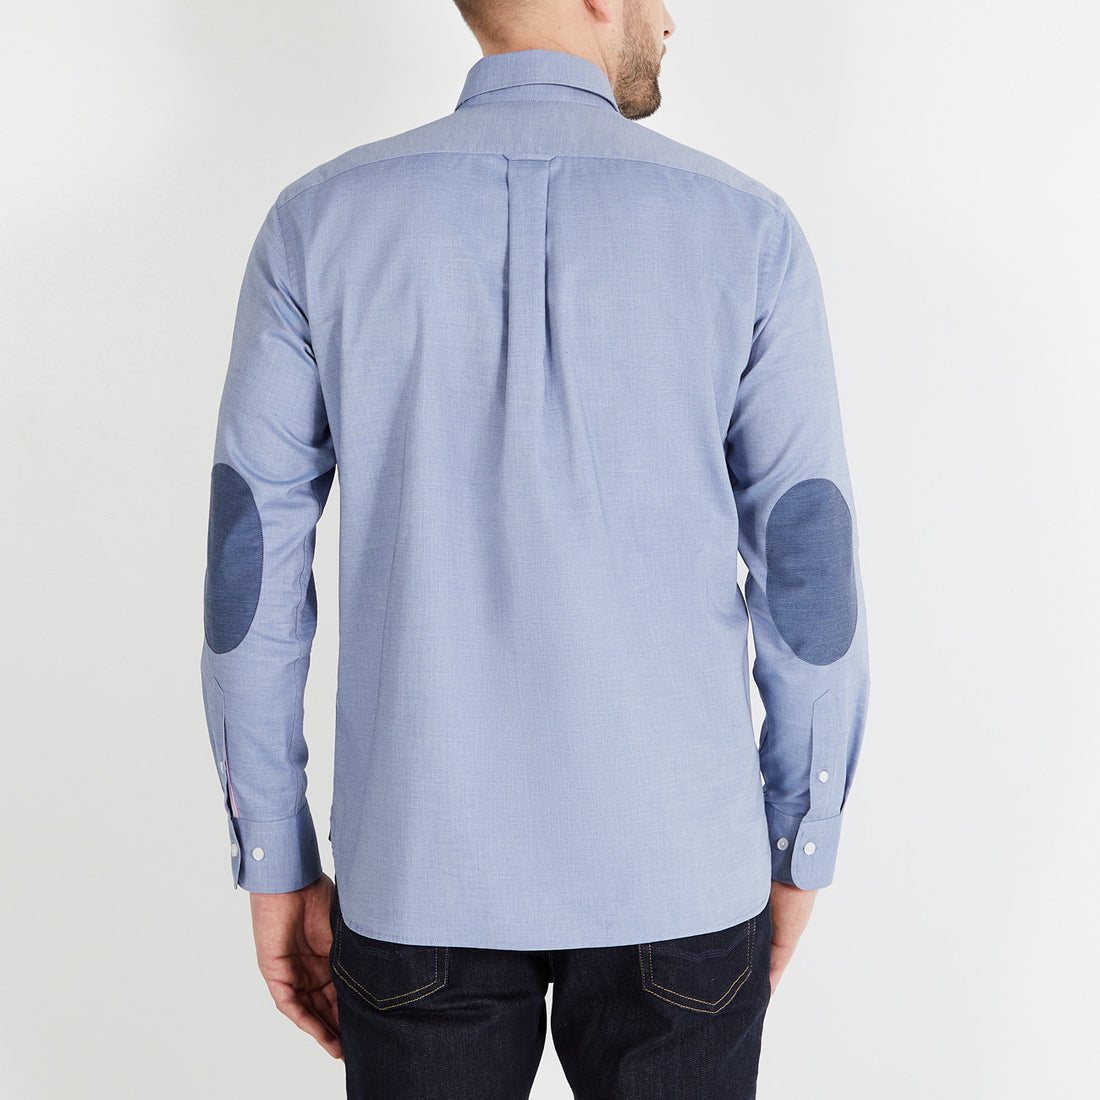 Pale Blue Shirt With Contrasting Elbow Patches_H23CHECL0032_BLM12_02